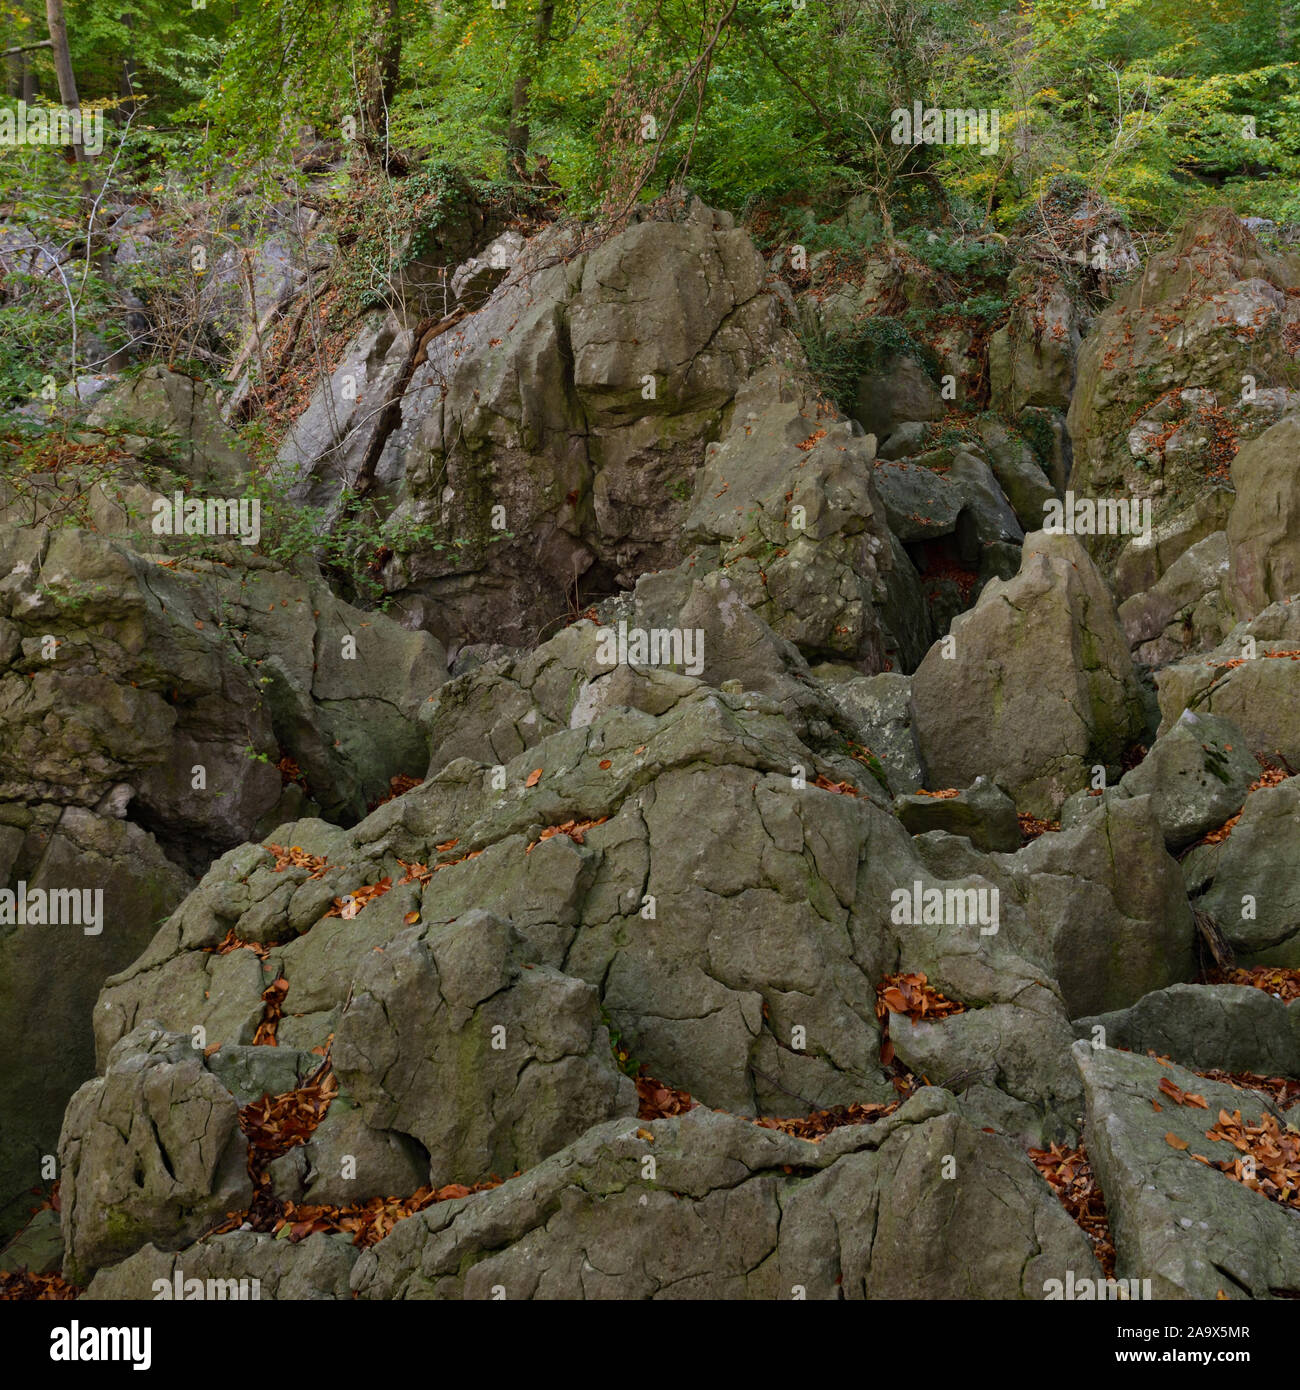 Felsenmeer, famous Nature Reserve, sea of rocks, rock chaos of Hemer, wildly romantic beech forest in autumn, fall, Germany, Europe. Stock Photo